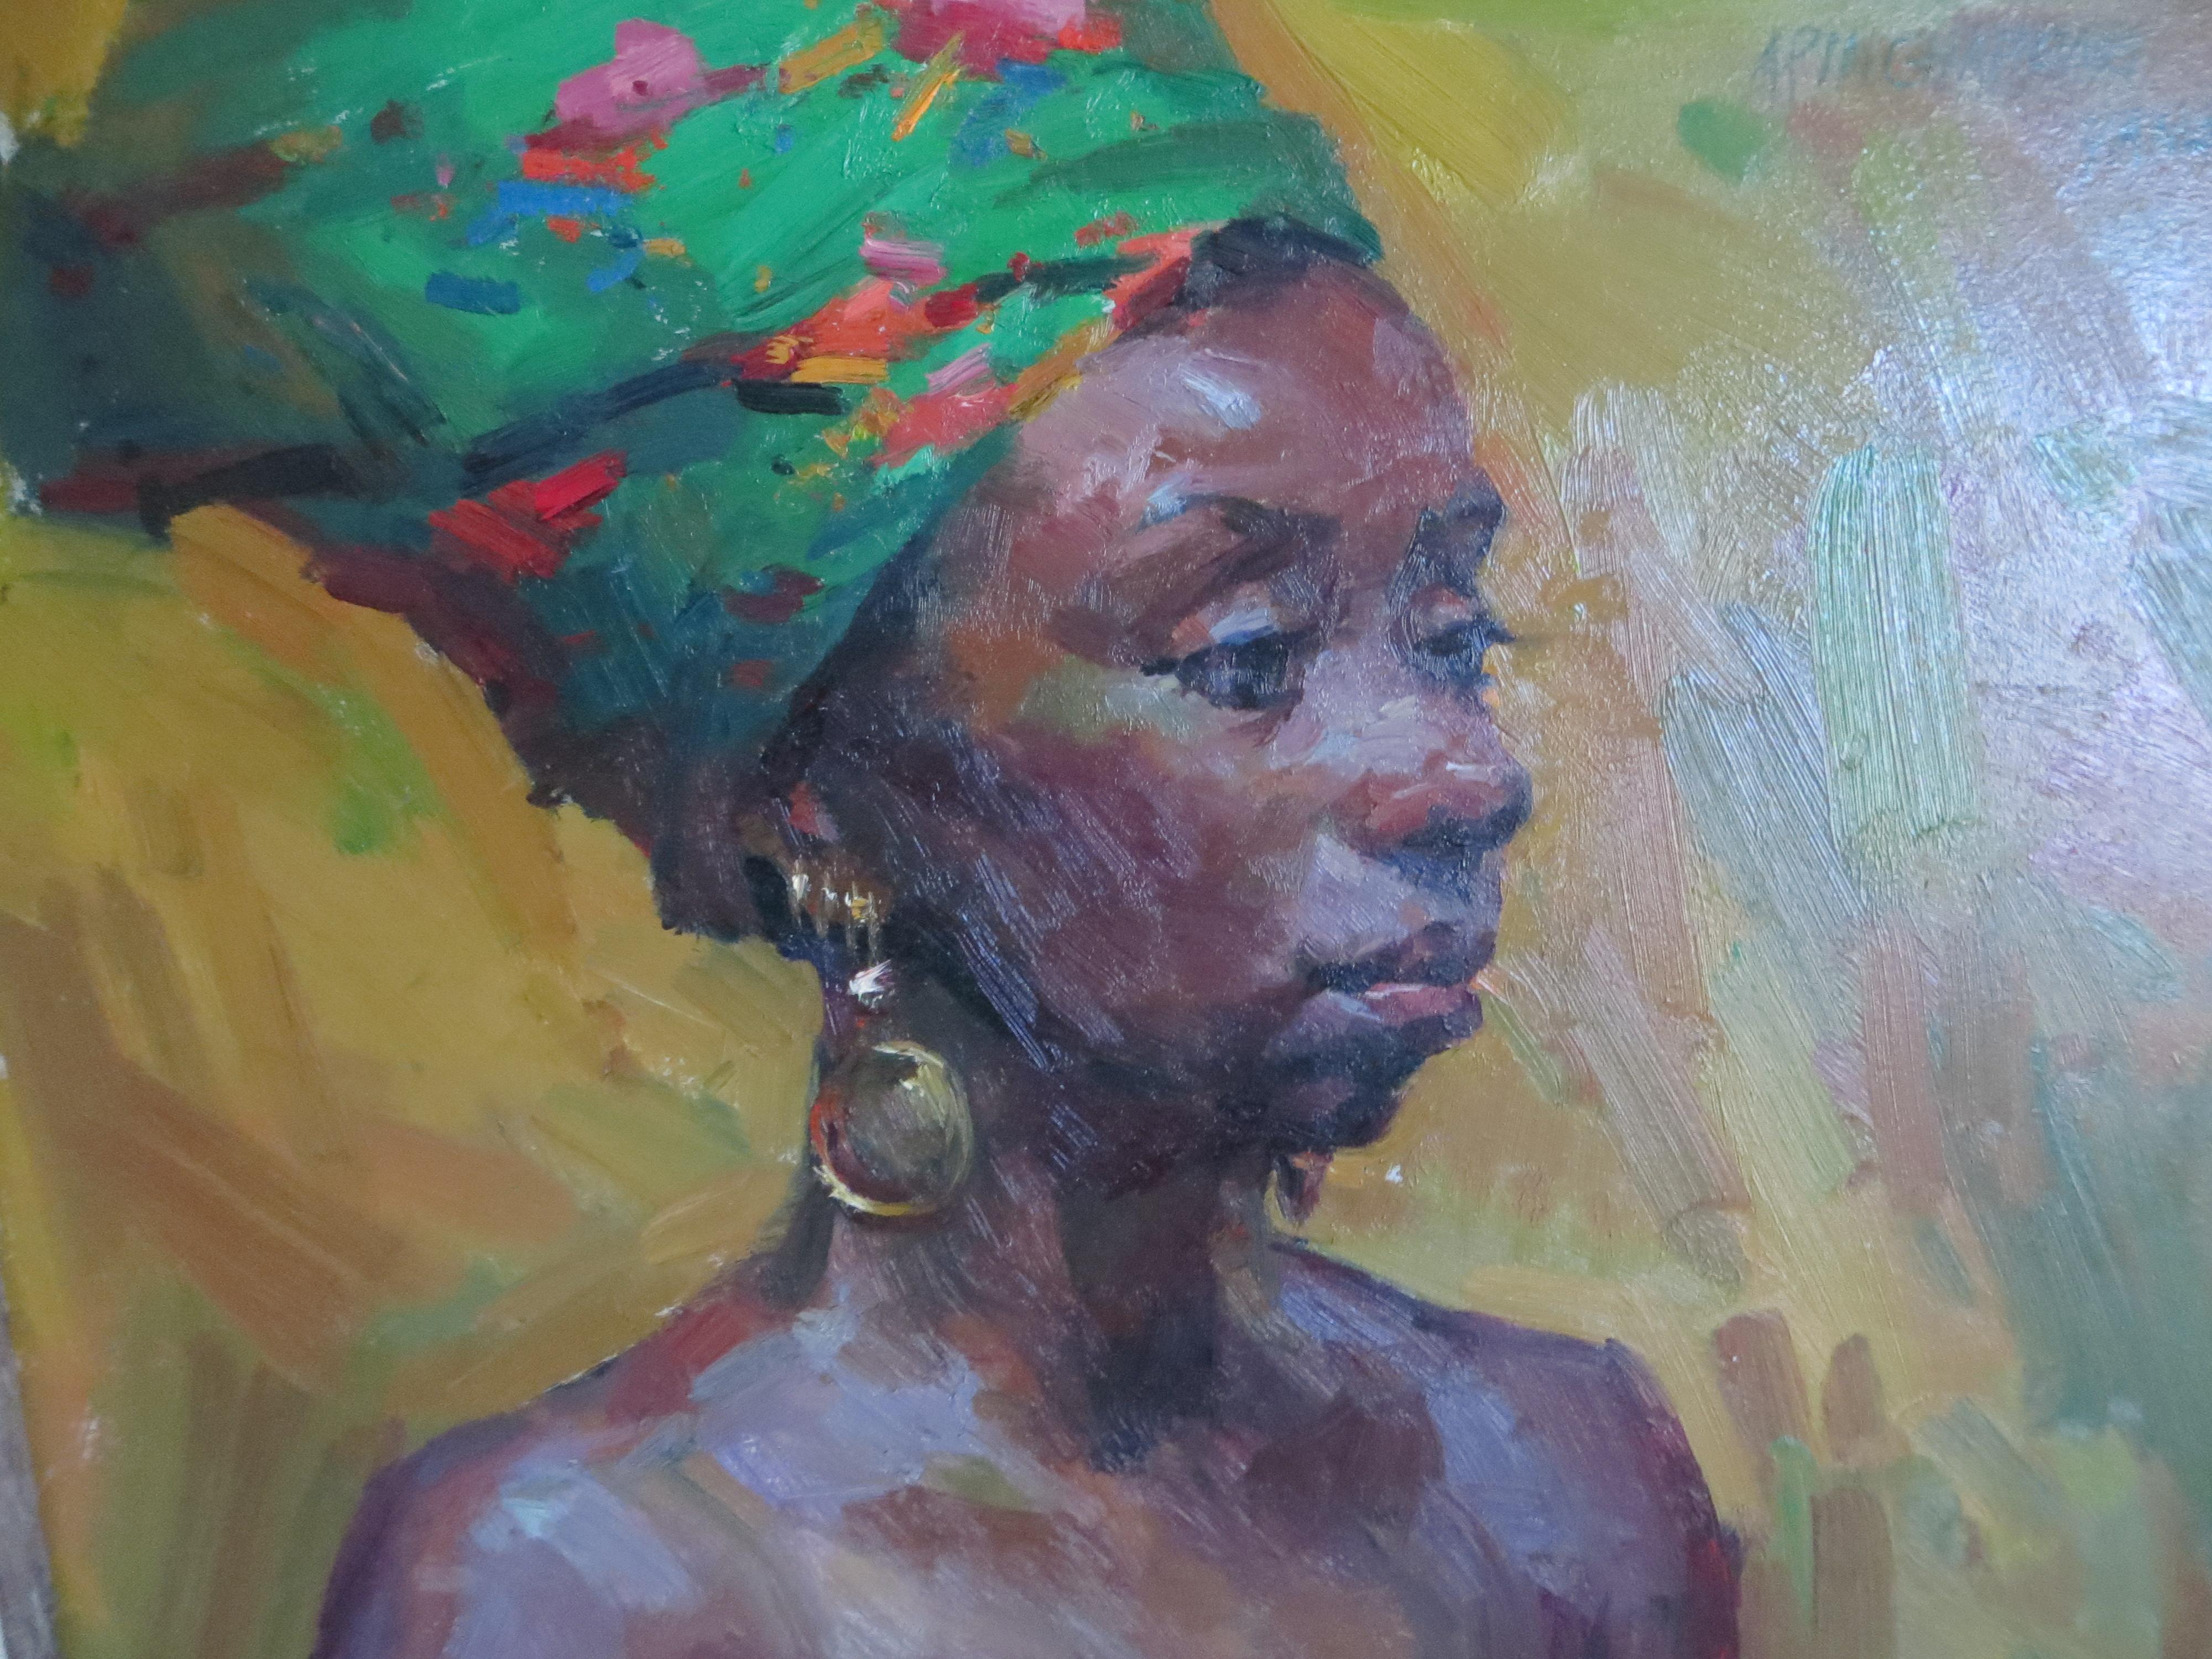 African Girl Portrait  by Apinchapong Yang  - Gray Figurative Painting by Unknown